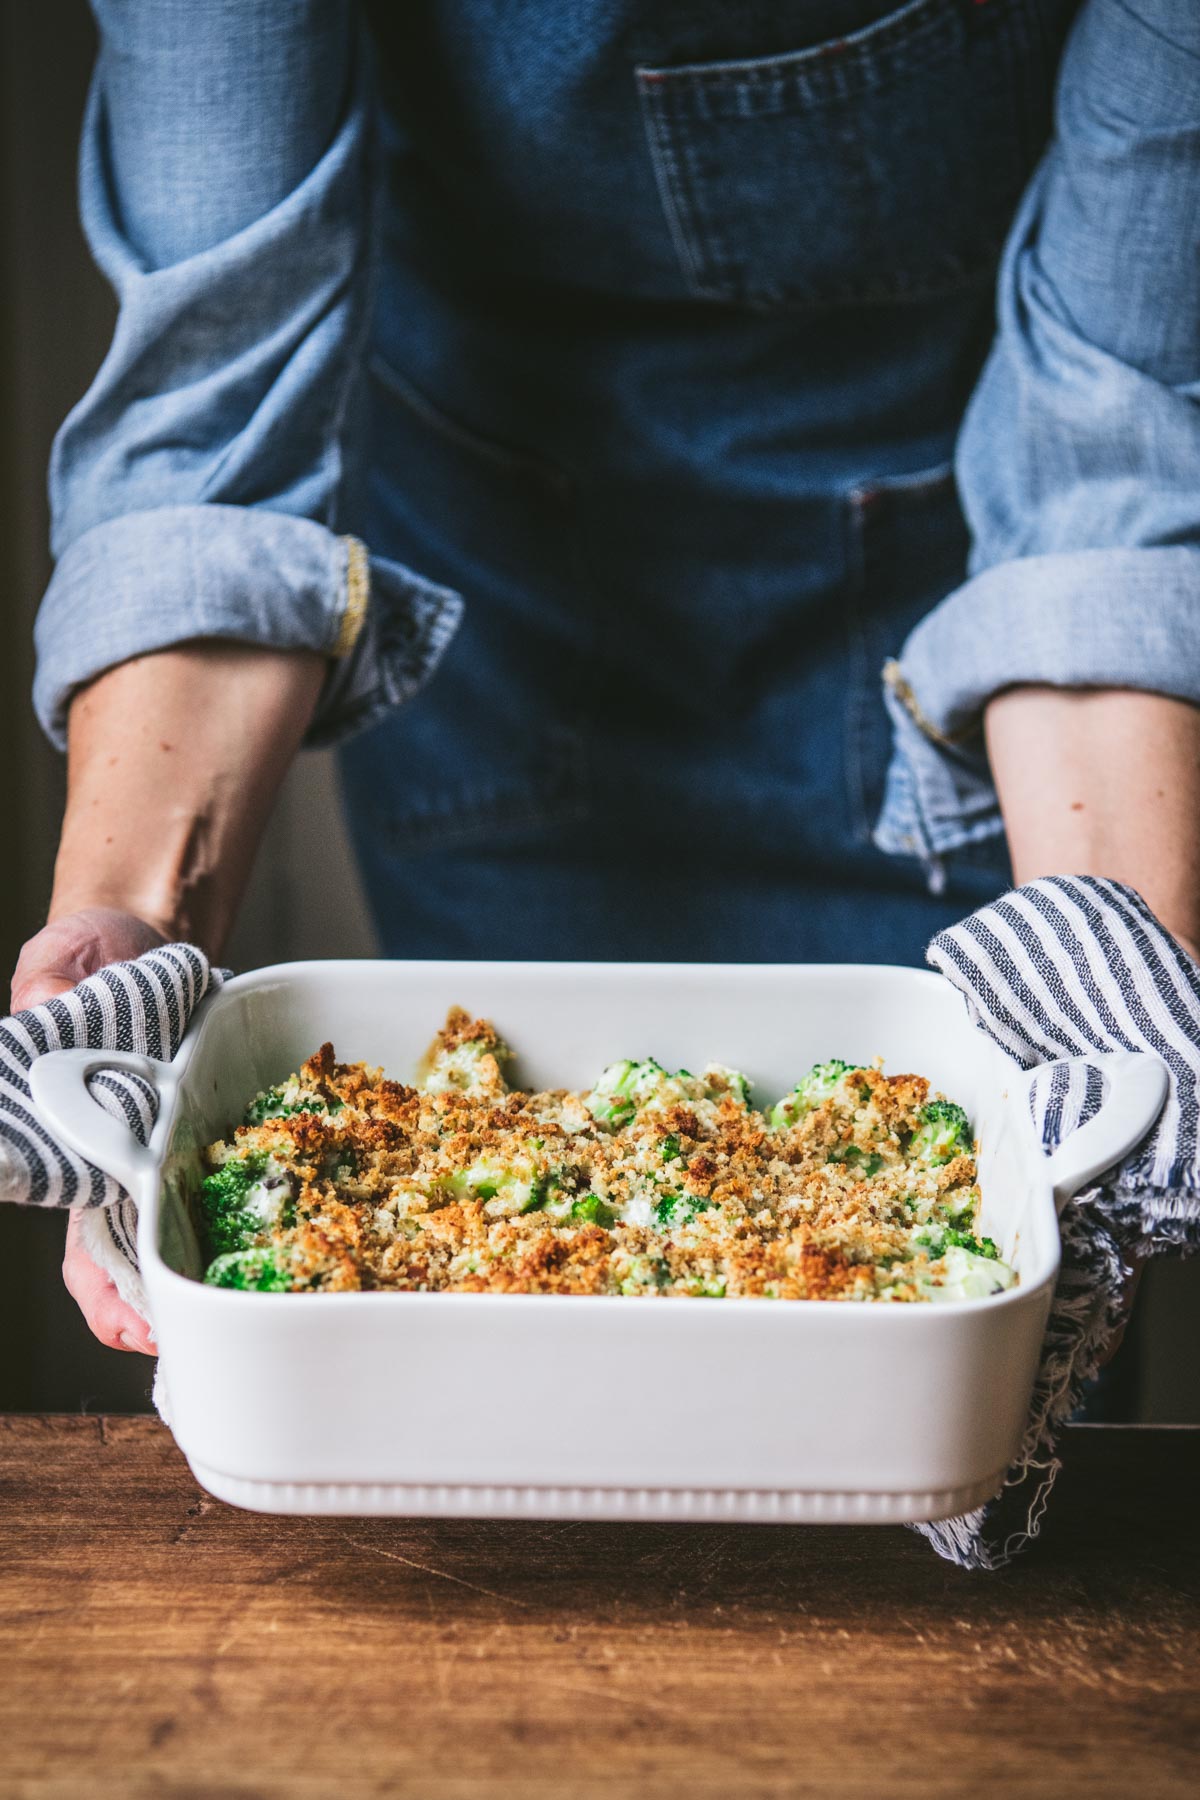 Hands placing a broccoli casserole in a white dish on a wooden table